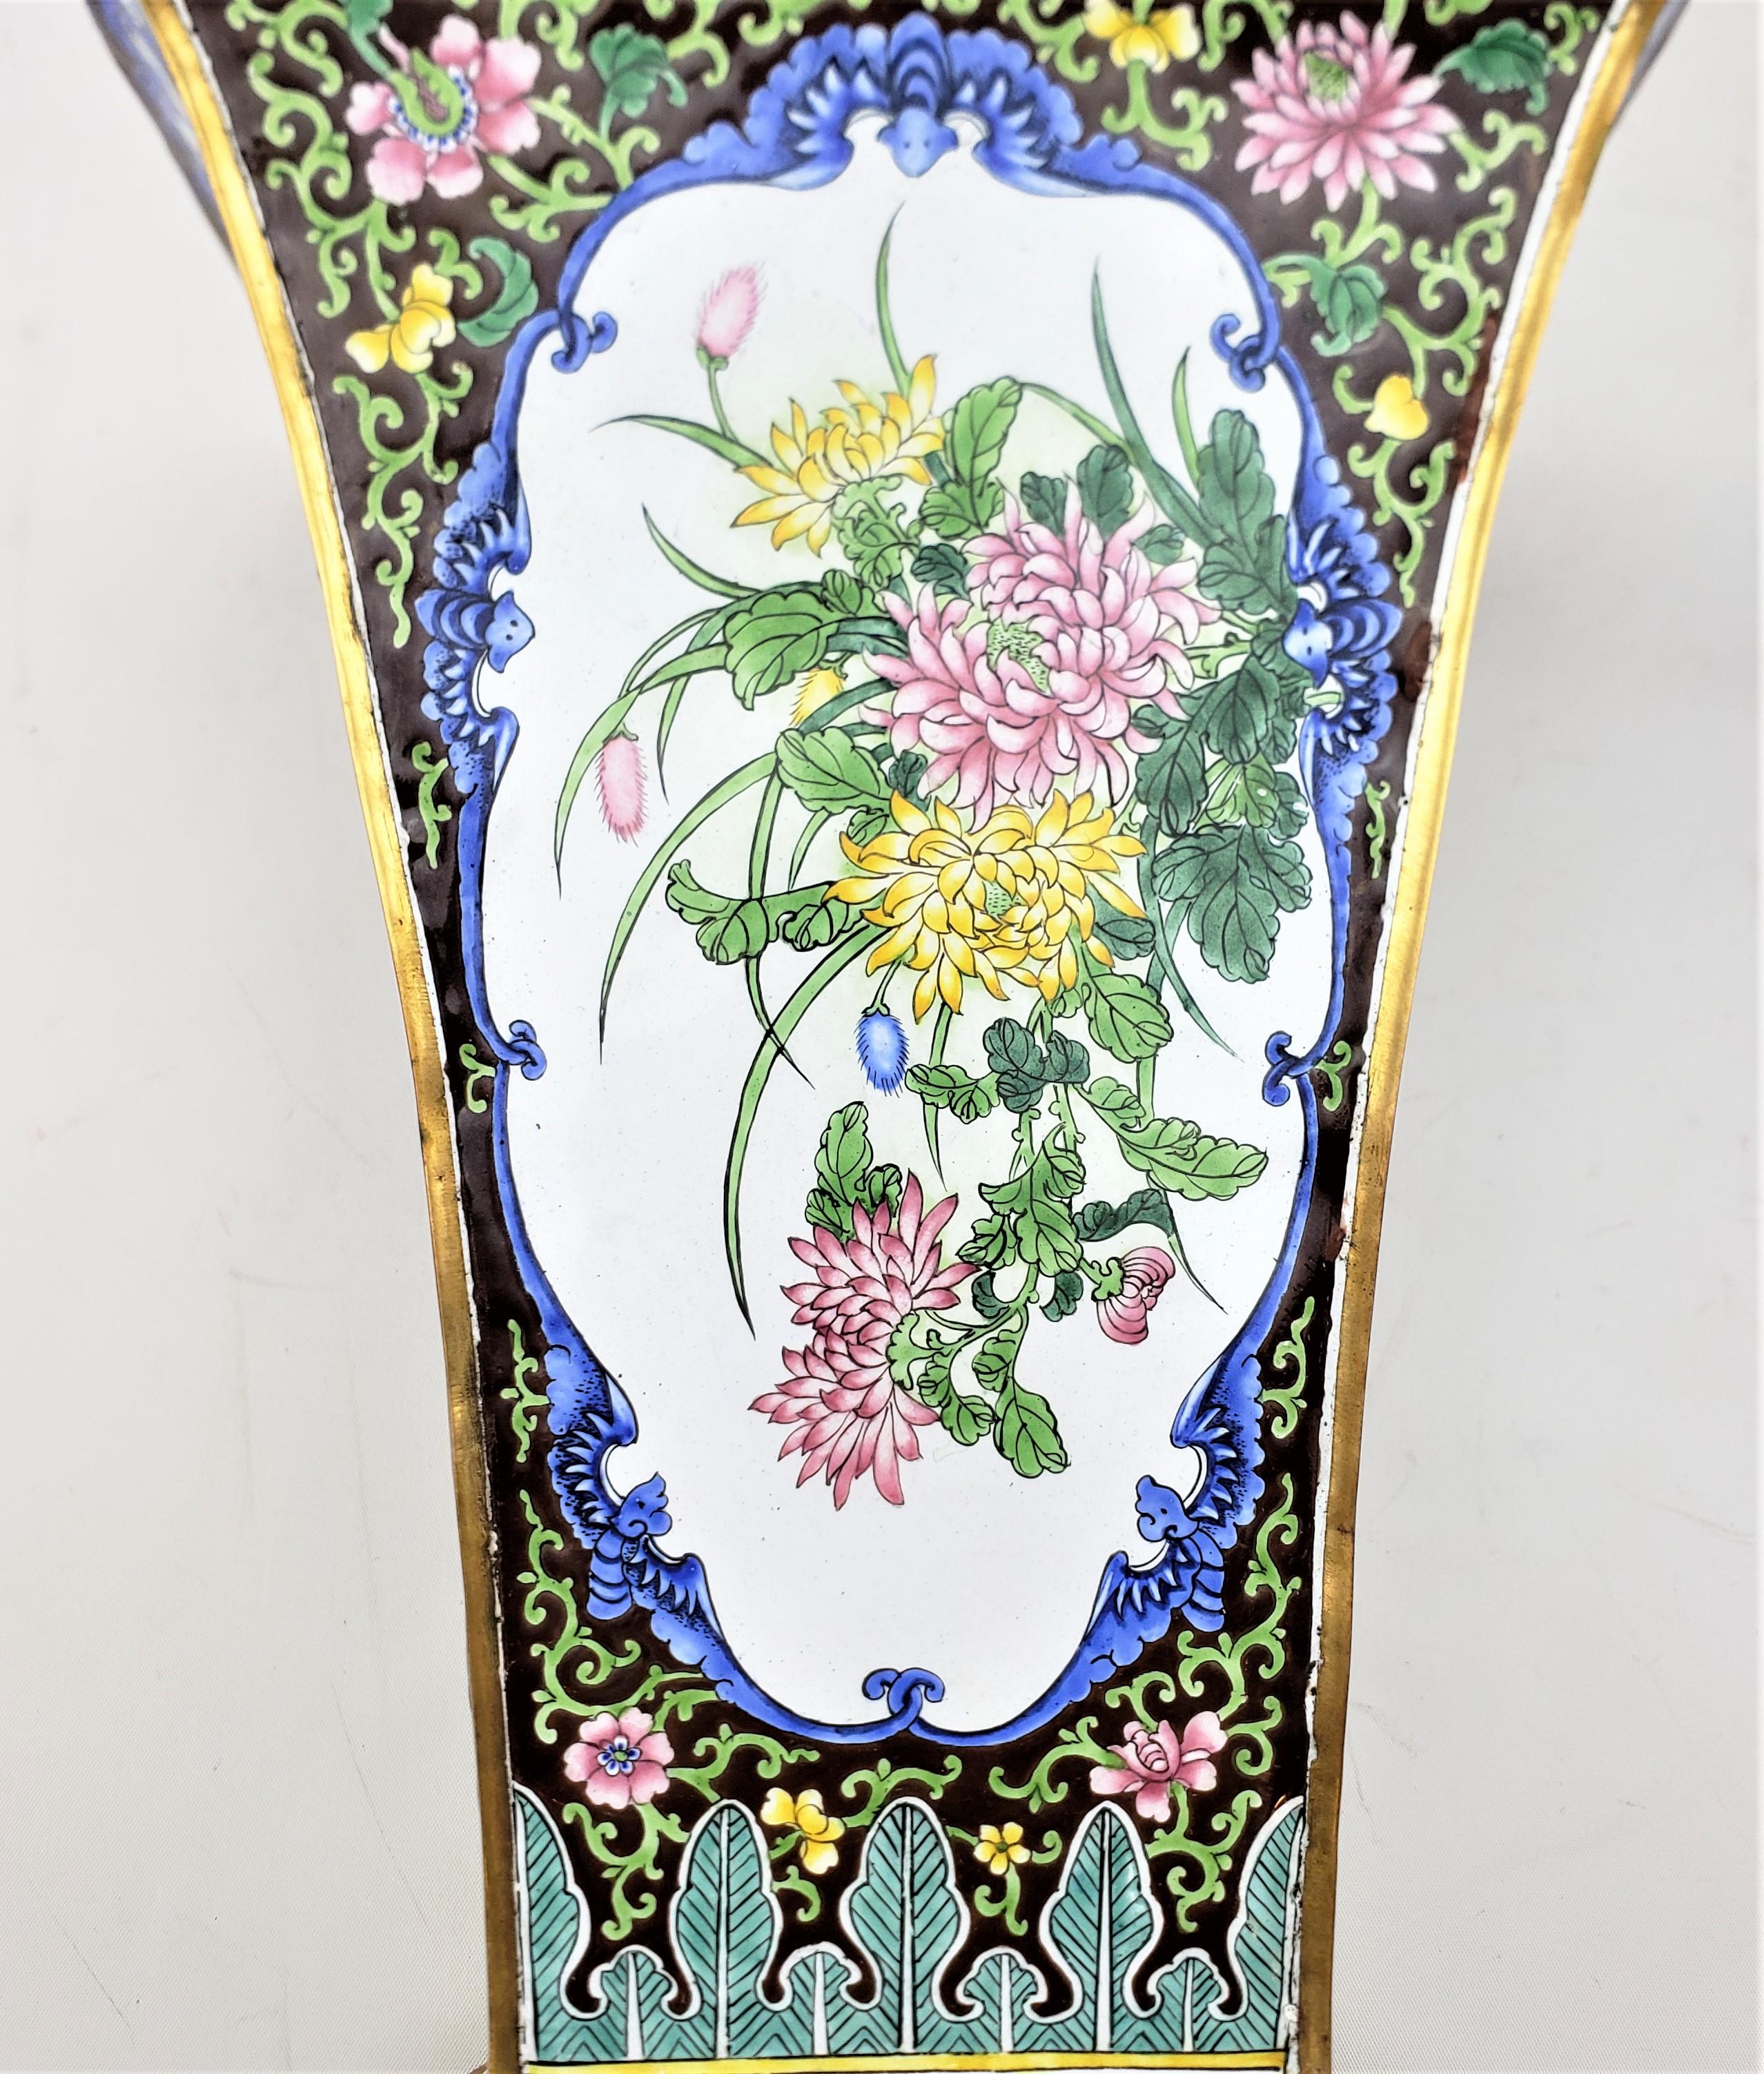 Pair of Mid 20th Century Enameled Copper Vases with Floral & Geisha Decoration For Sale 8